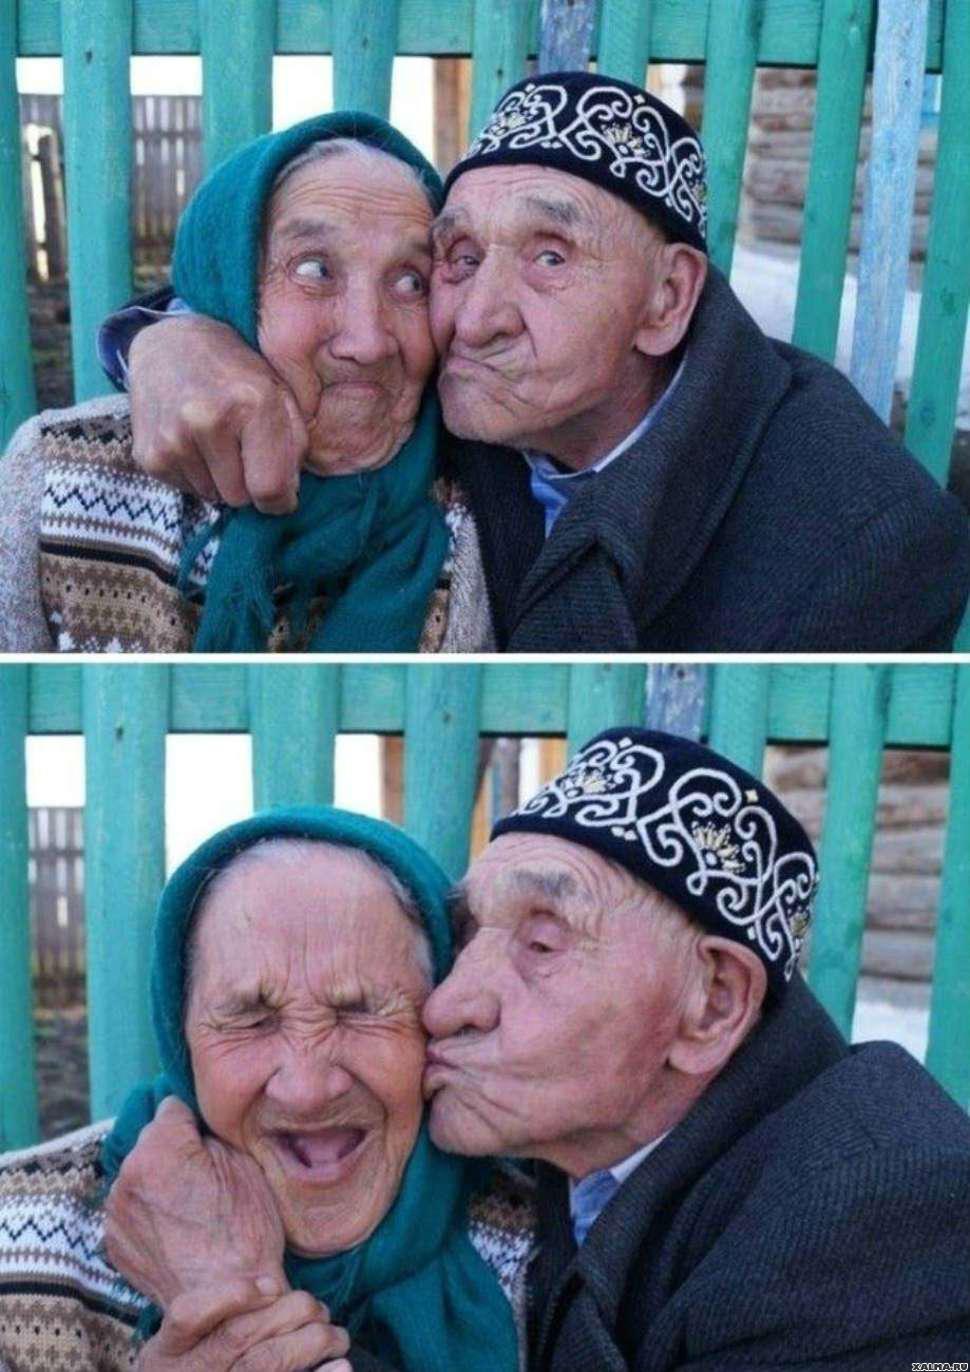 Funny Old Couple Kissing Image